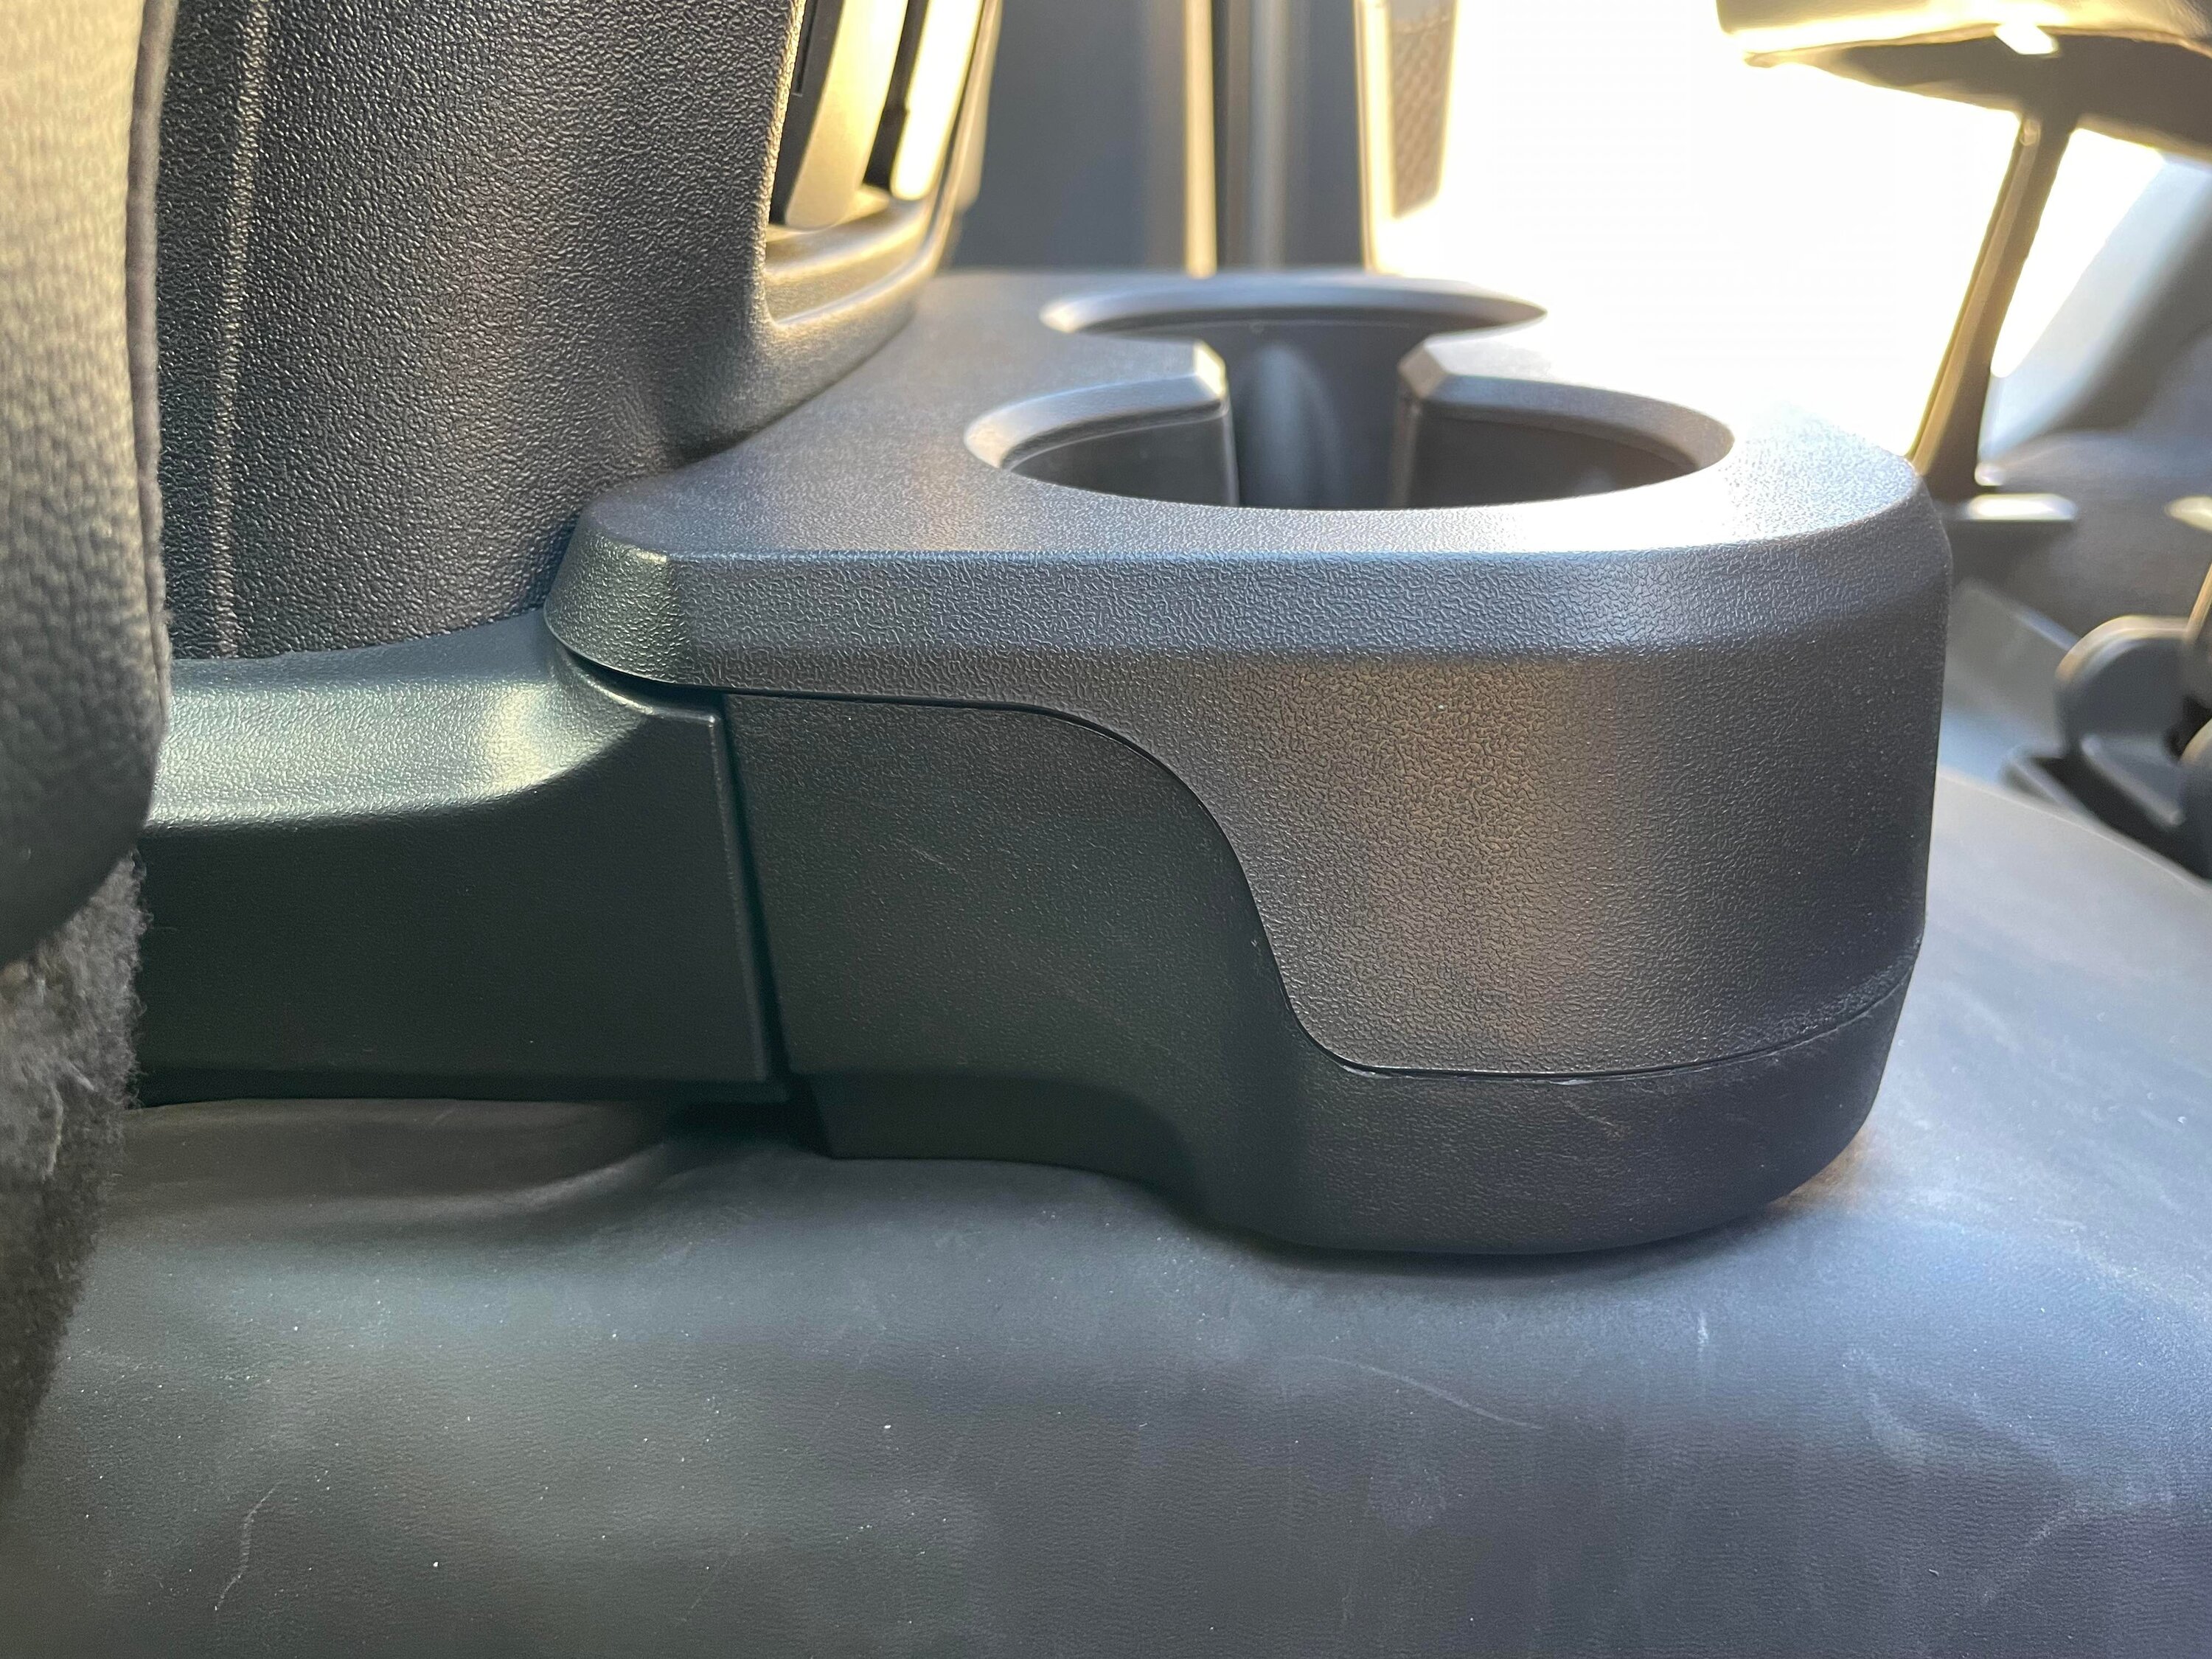 BEHOLD! Rear cup holders!  Bronco6G - 2021+ Ford Bronco & Bronco